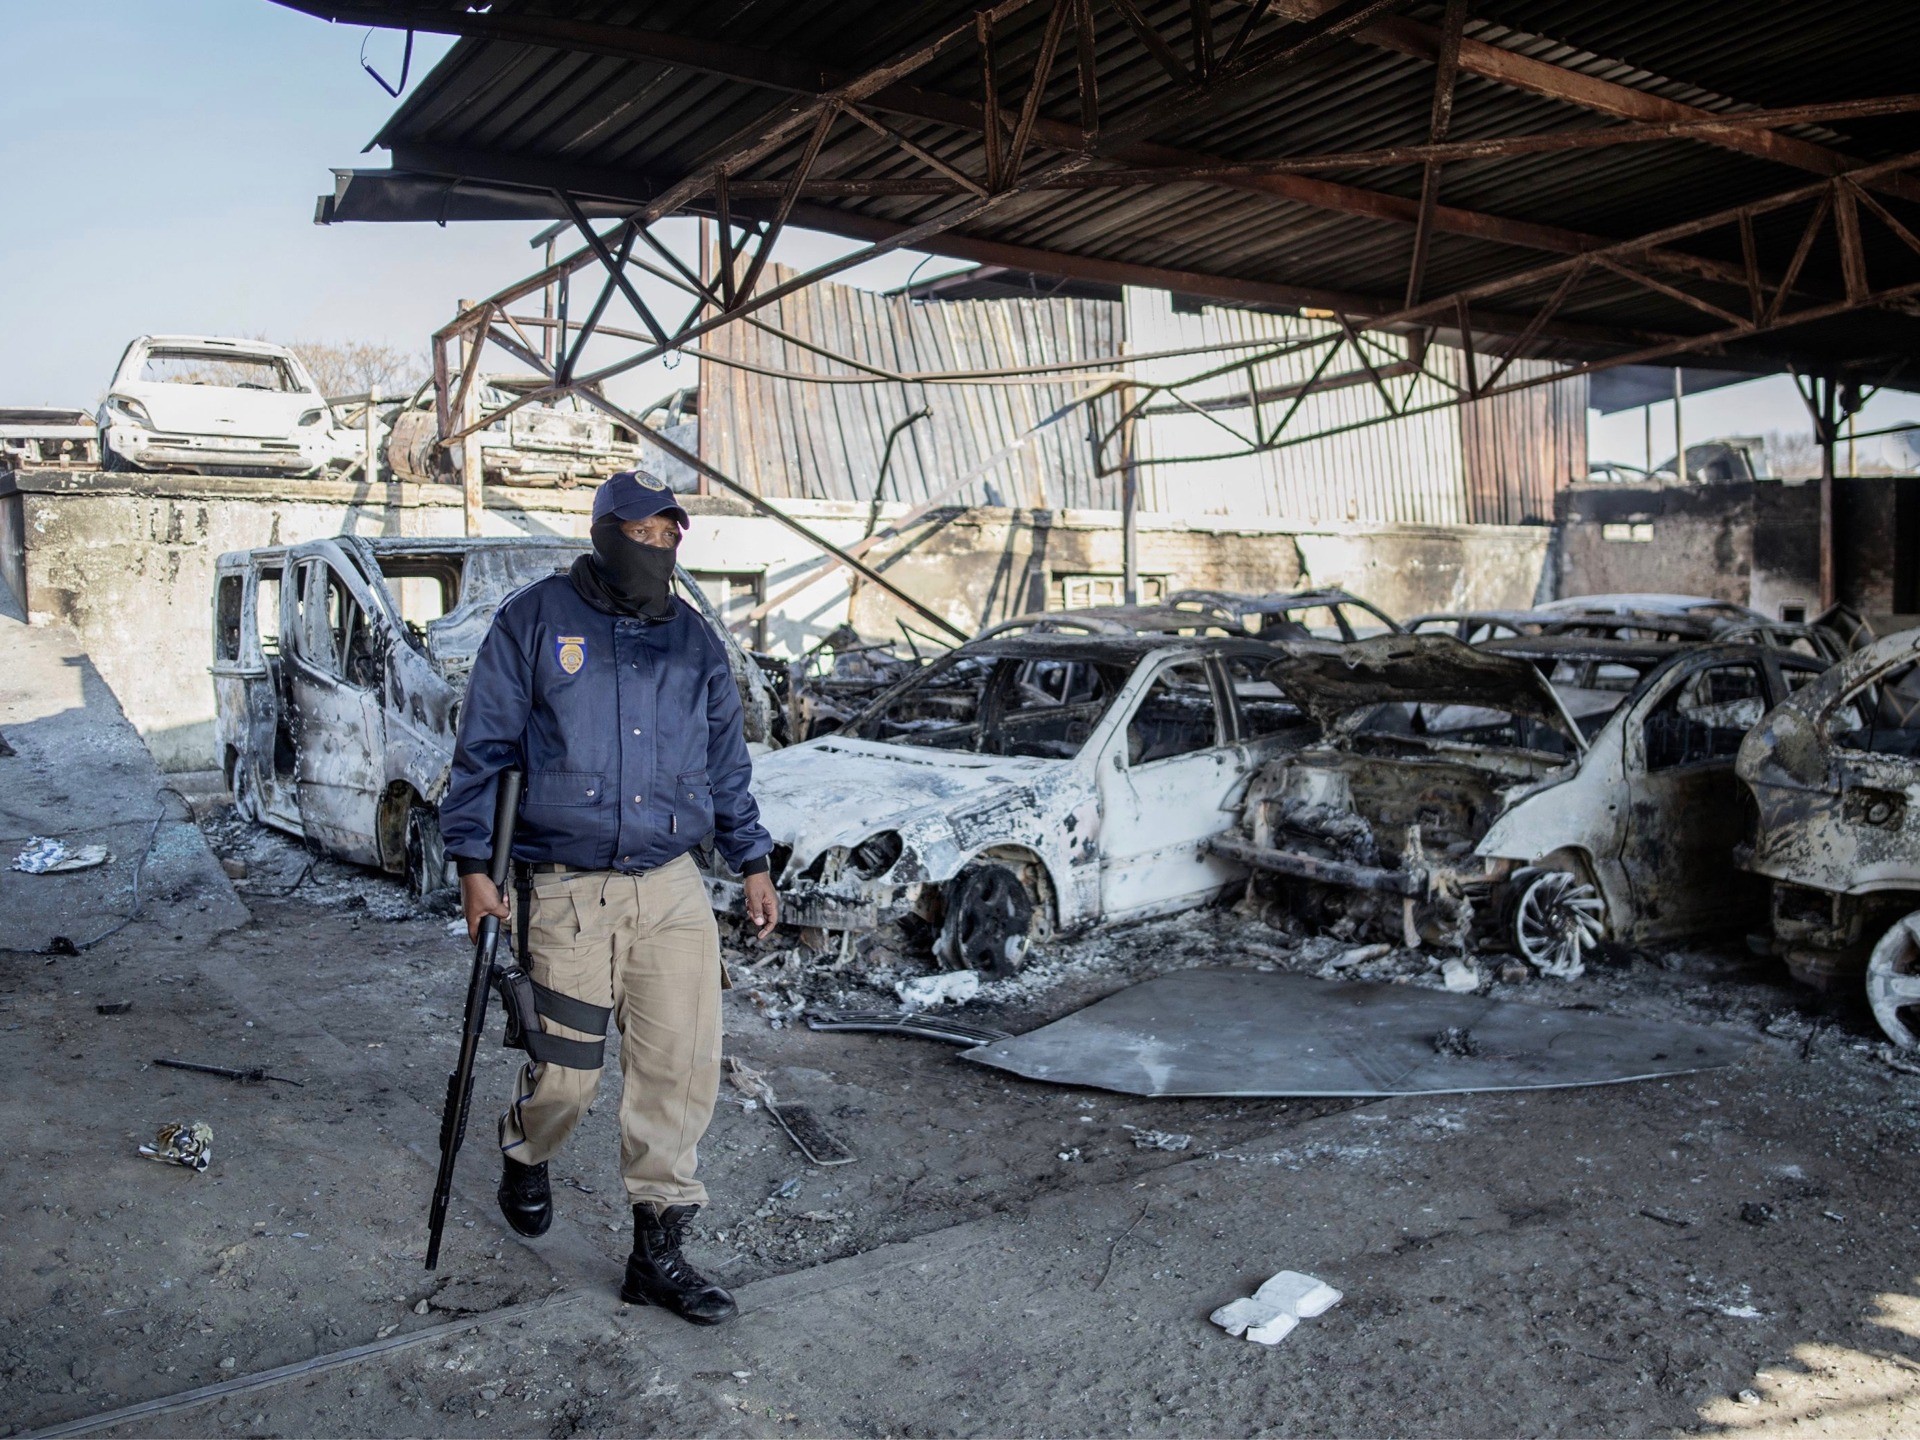 A Johannesburg Metro Police Department (JMPD) officer walks past the wreckage of burnt cars at a car showroom in Jeppestown district, Johannesburg, on July 11, 2021. - Several shops are damaged and cars burnt in Jeppestown, Johannesburg, following a night of violence. Police are on the scene trying to control further protests. It is unclear if this is linked to sporadic protests following the incarceration of former president Jacob Zuma. (Photo by LUCA SOLA / AFP) (Photo by LUCA SOLA/AFP via Getty Images)